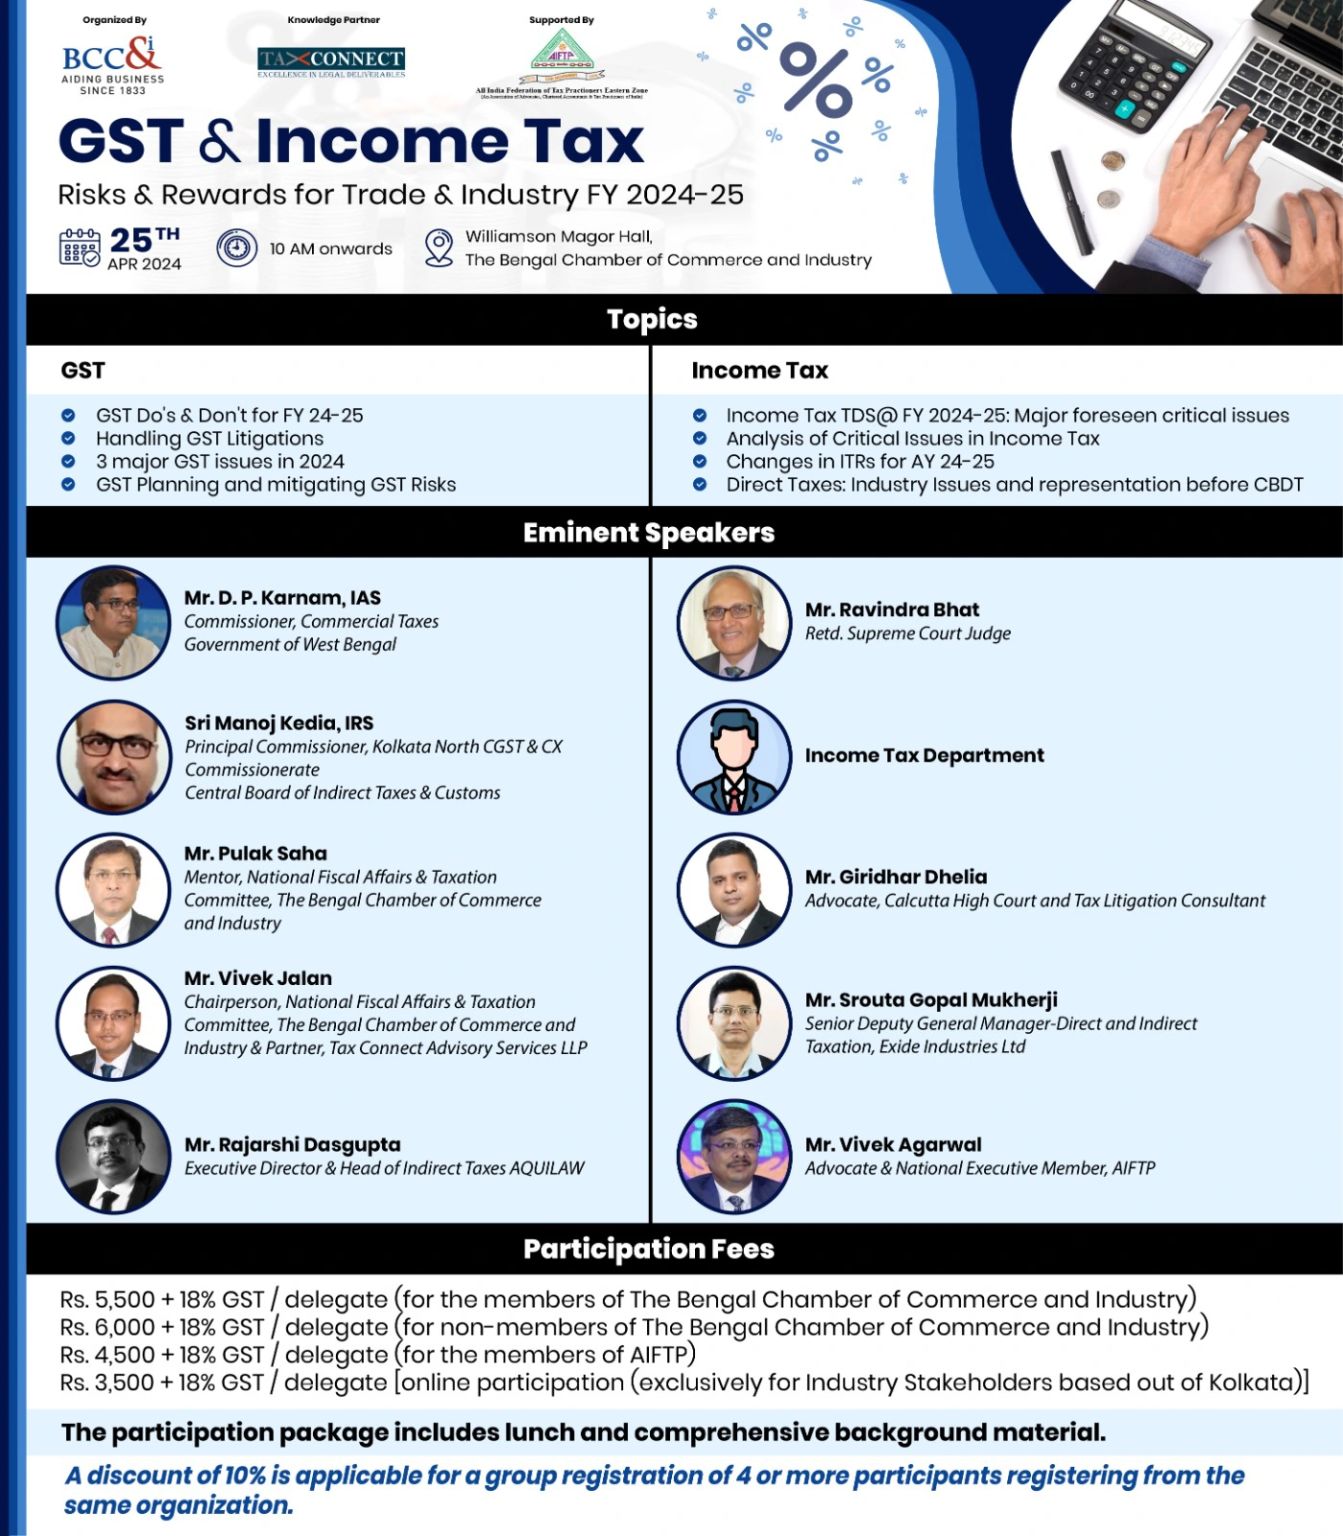 The Bengal Chamber of Commerce and Industry is arranging a seminar on GST & Income Tax - Risks & Rewards for Trade & Industry FY 2024-25.